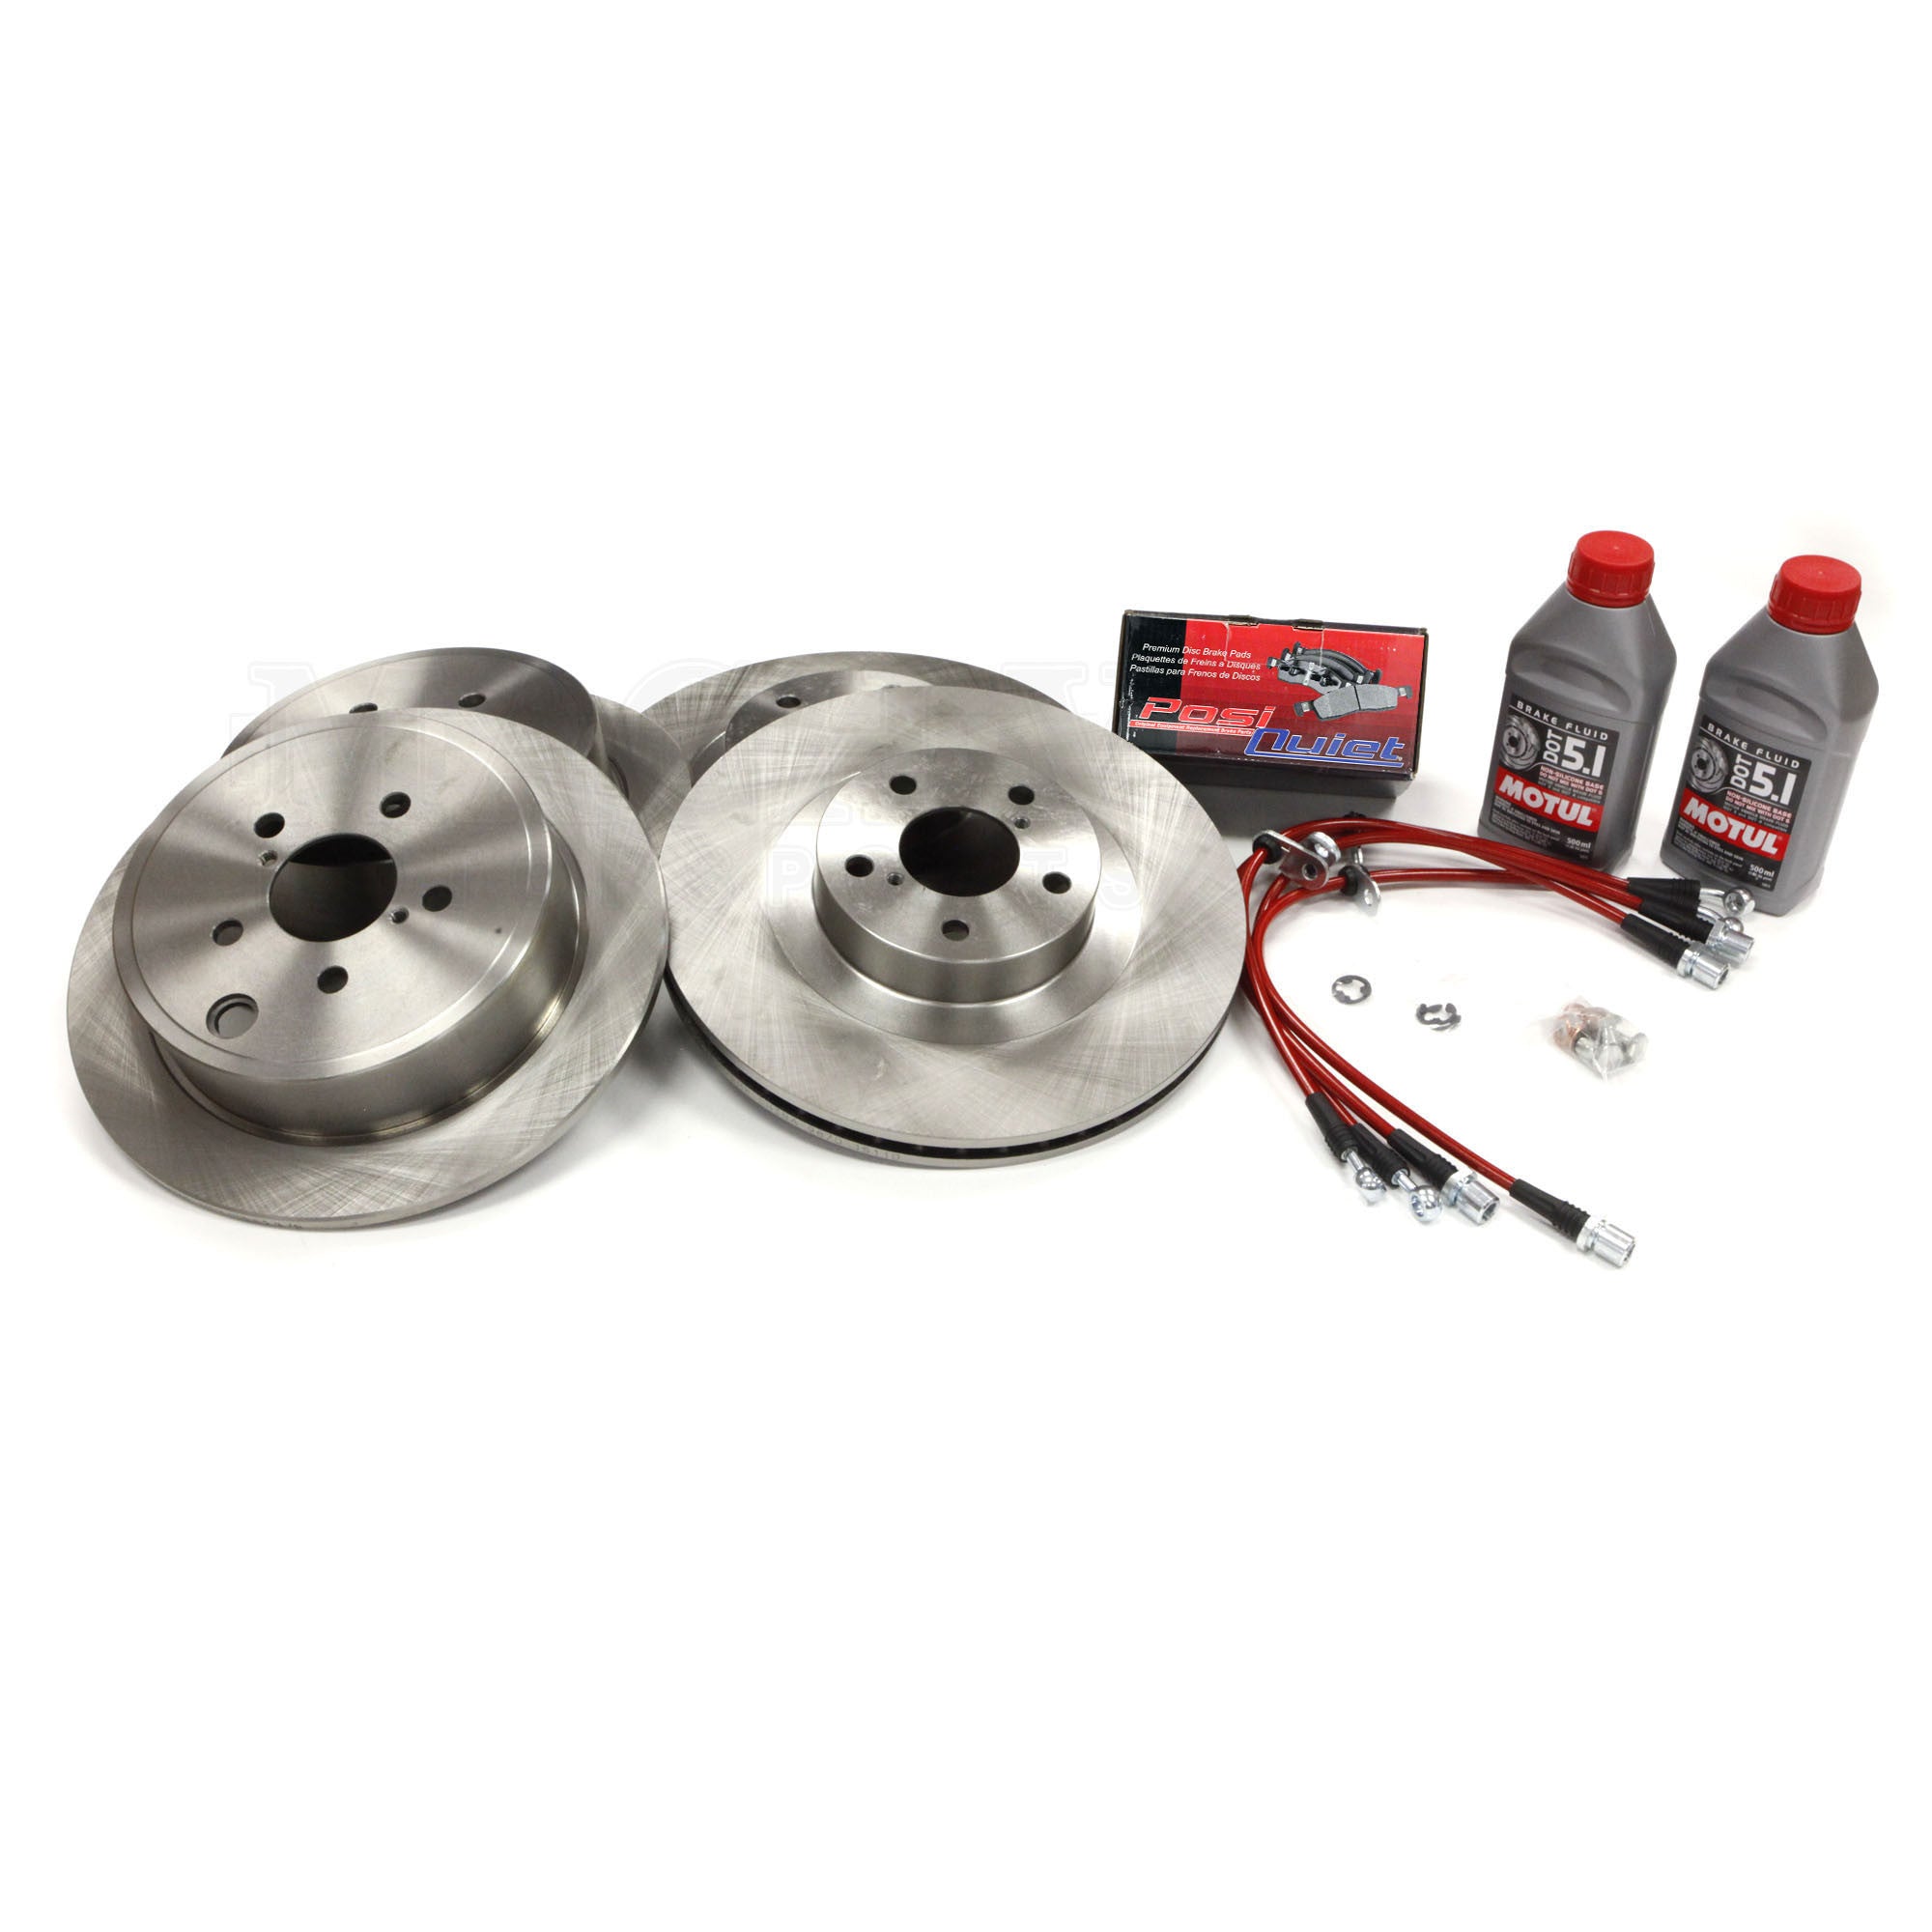 Brake Pad/Rotor Kit 2002 WRX Front/Rear Complete